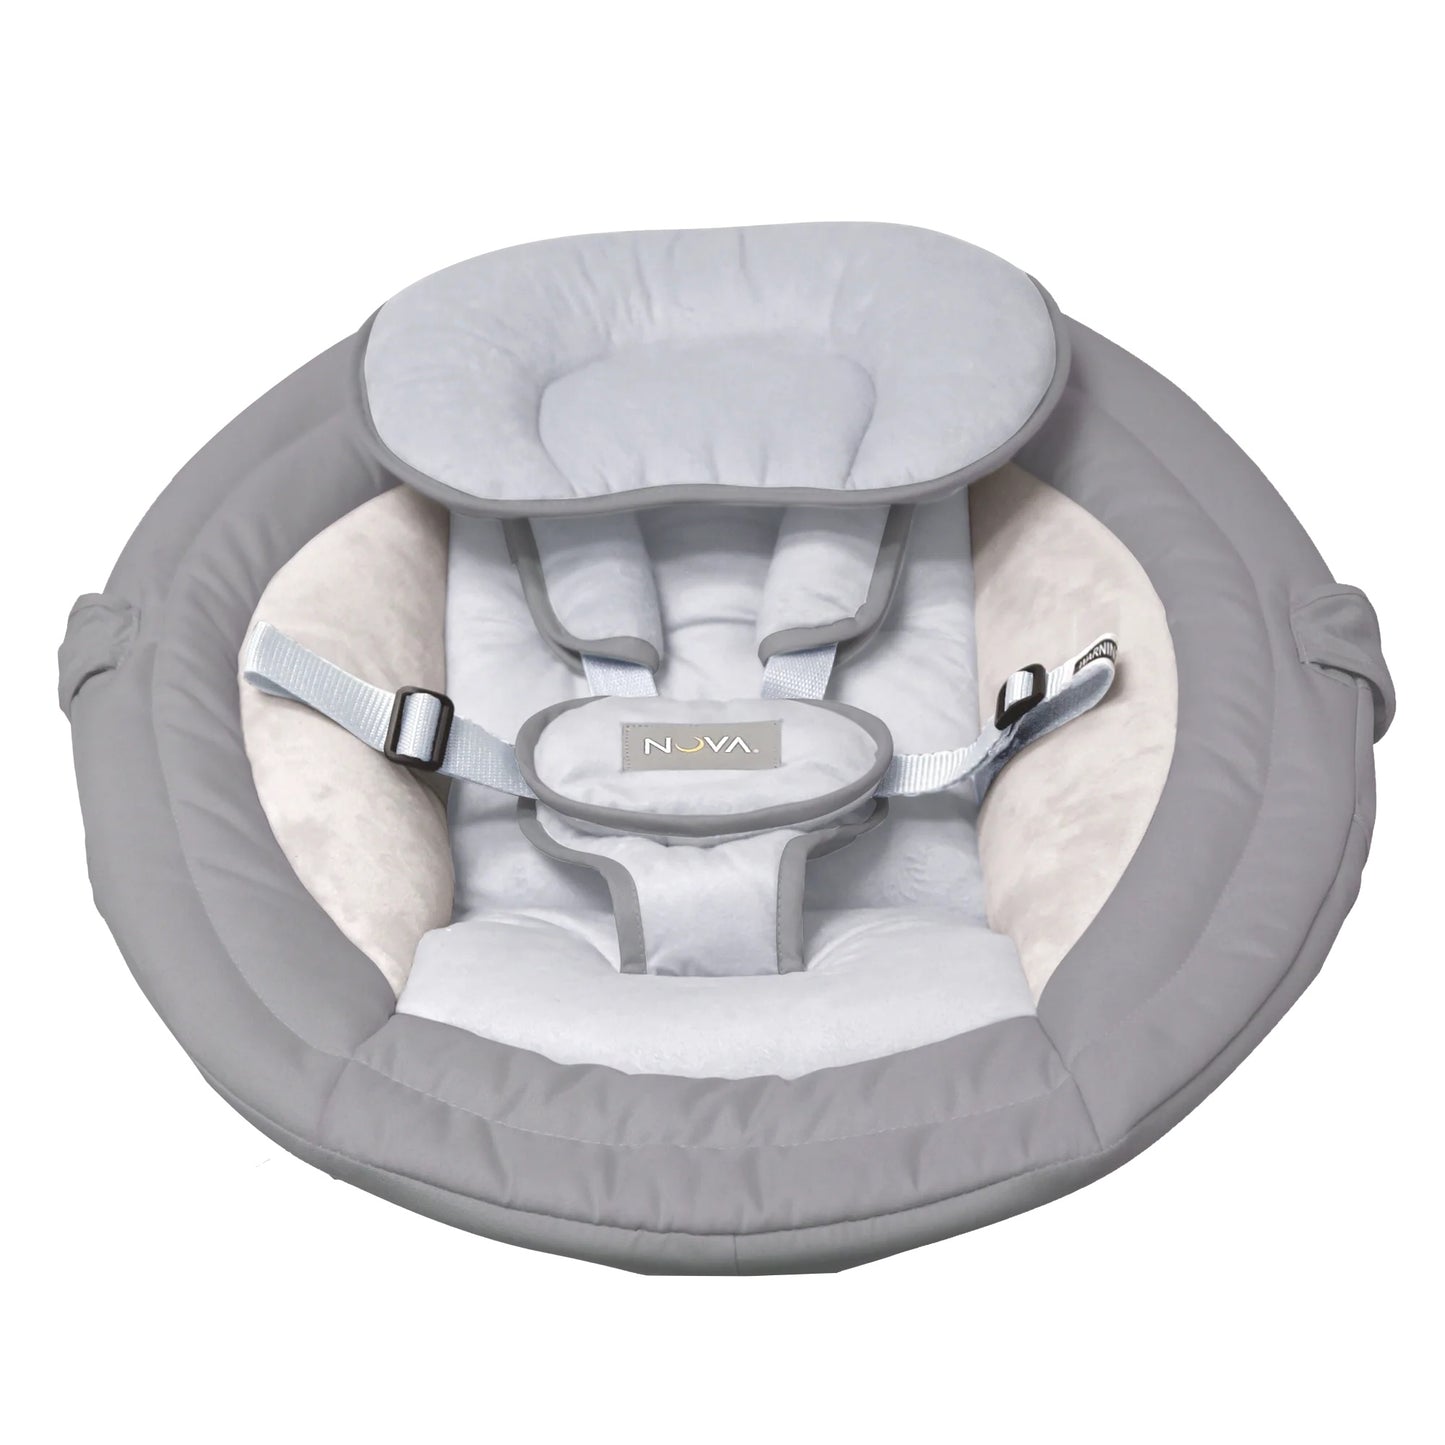 Removable Seat Cover for Nova Baby Swing